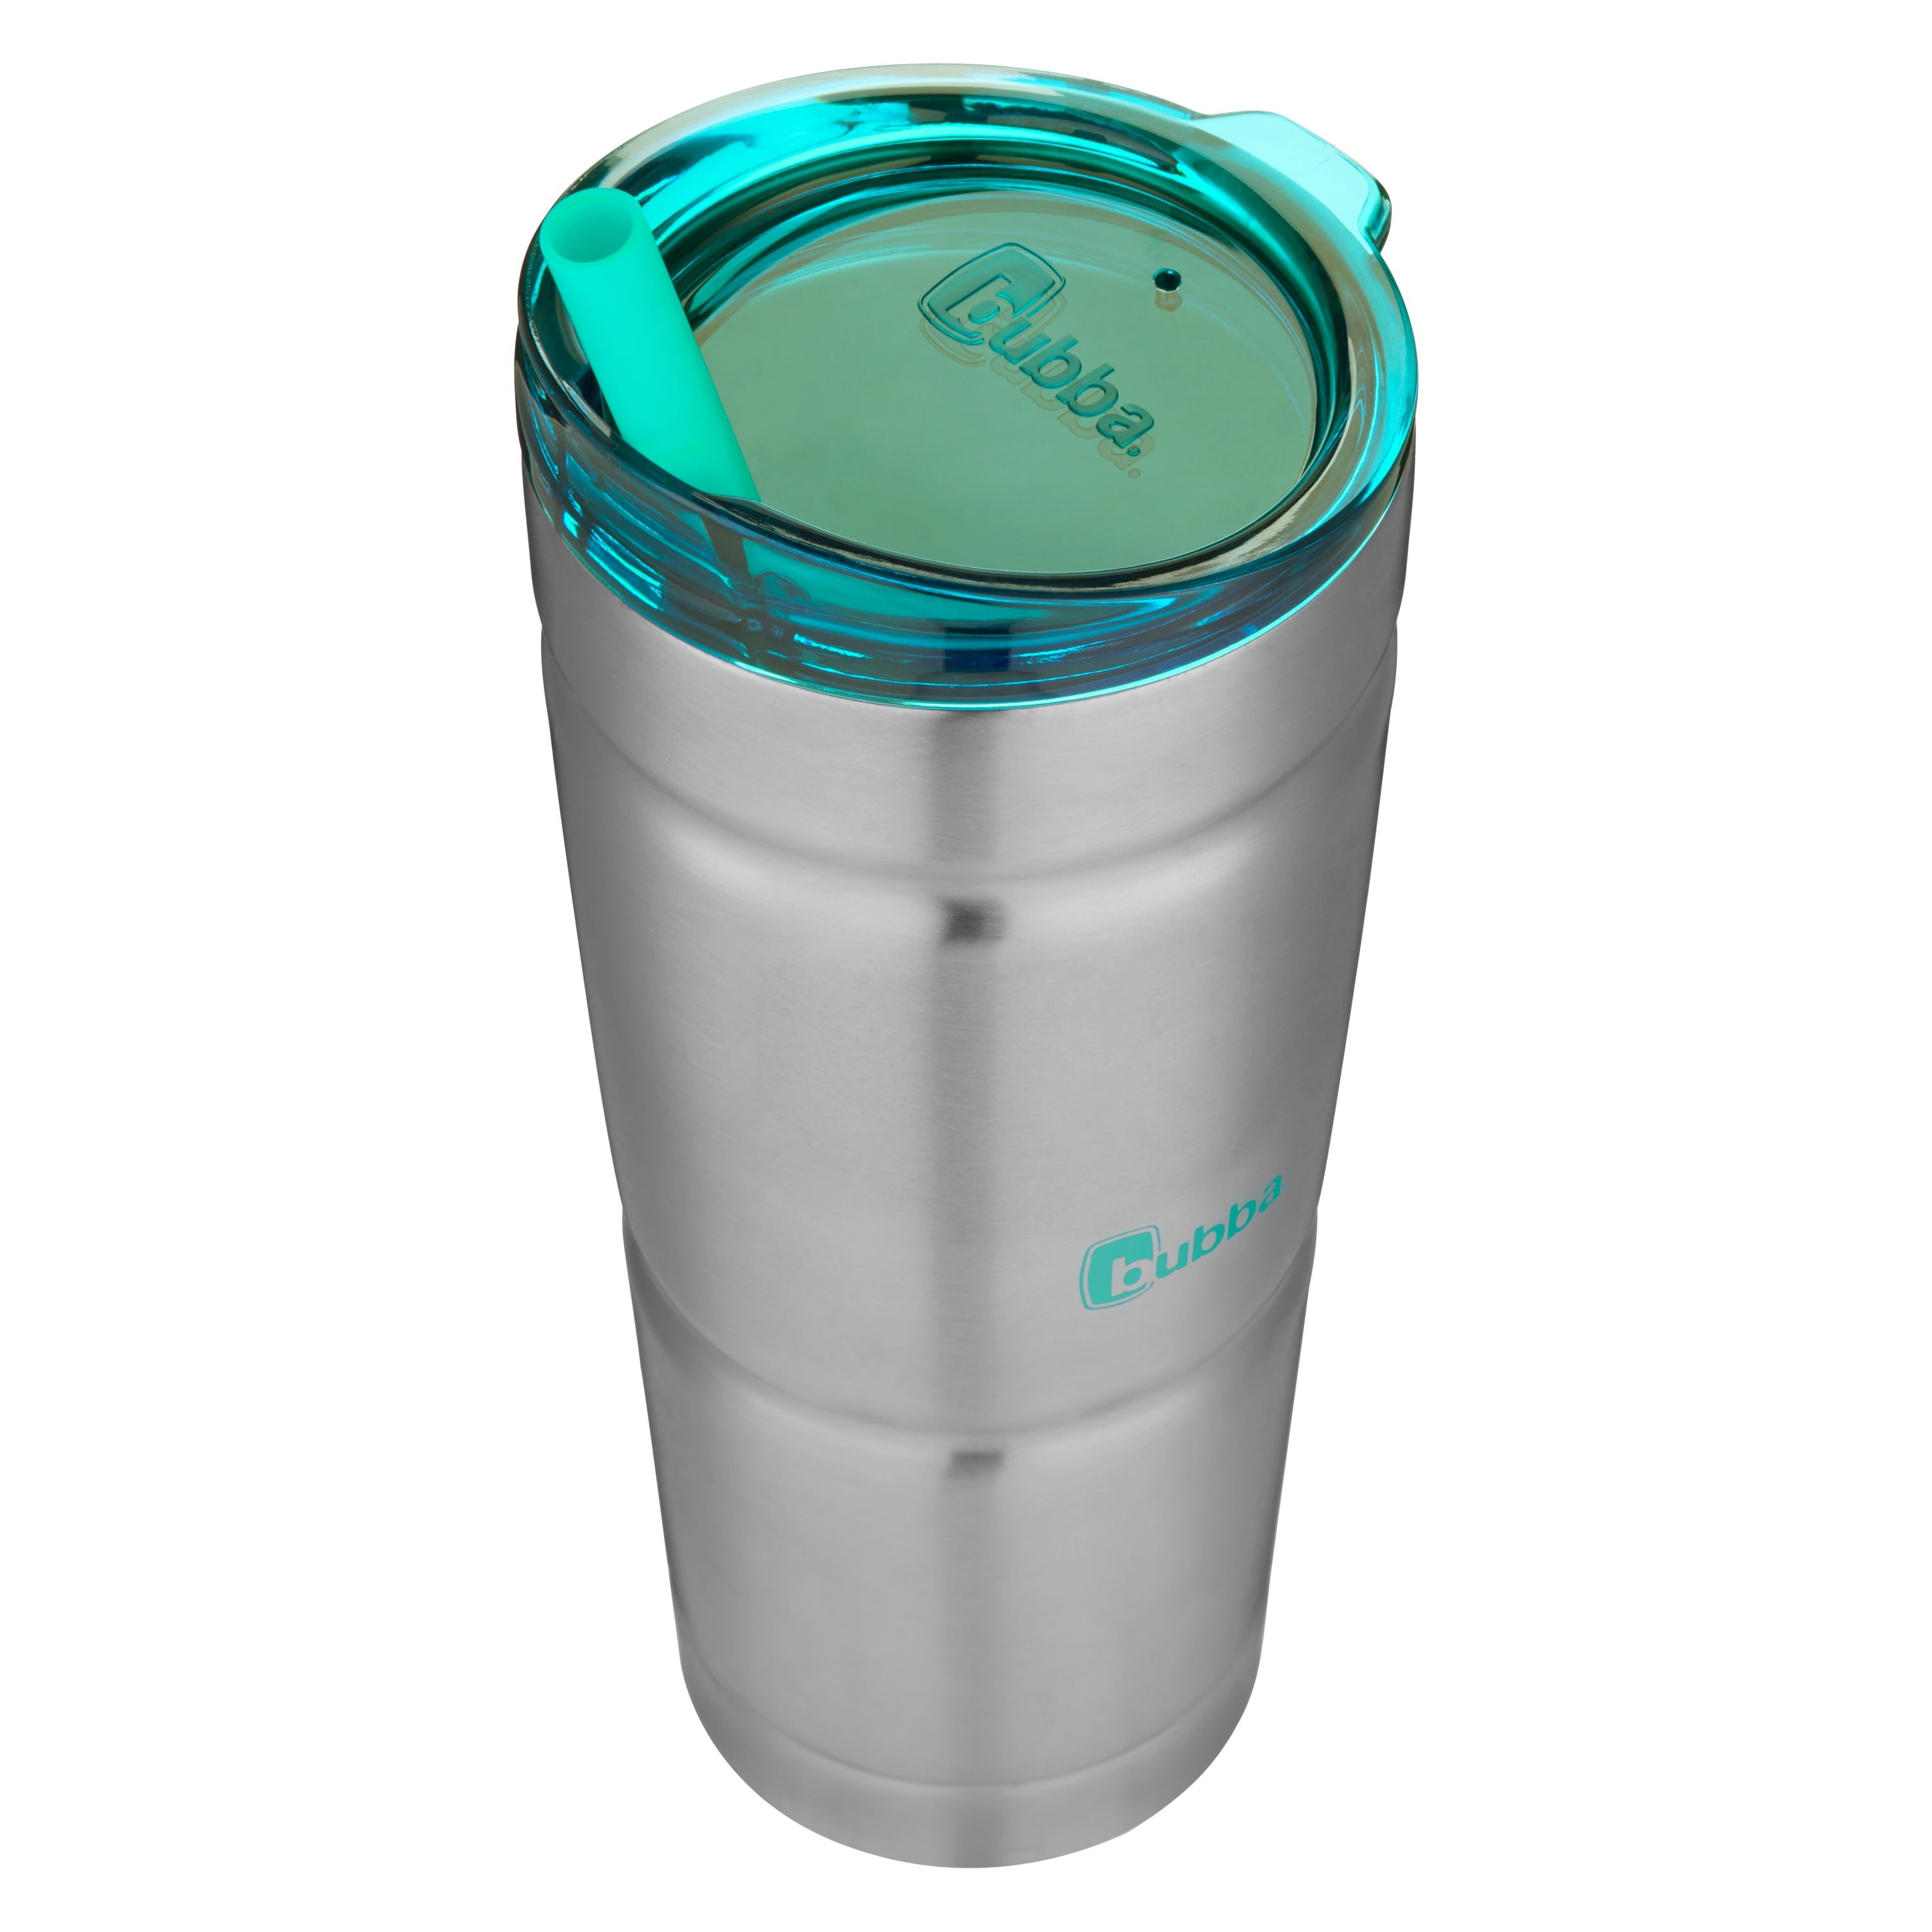 Bubba Envy S Stainless Steel Tumbler with Straw and Bumper Rubberized in Teal, 24 fl oz., Size: 24 oz